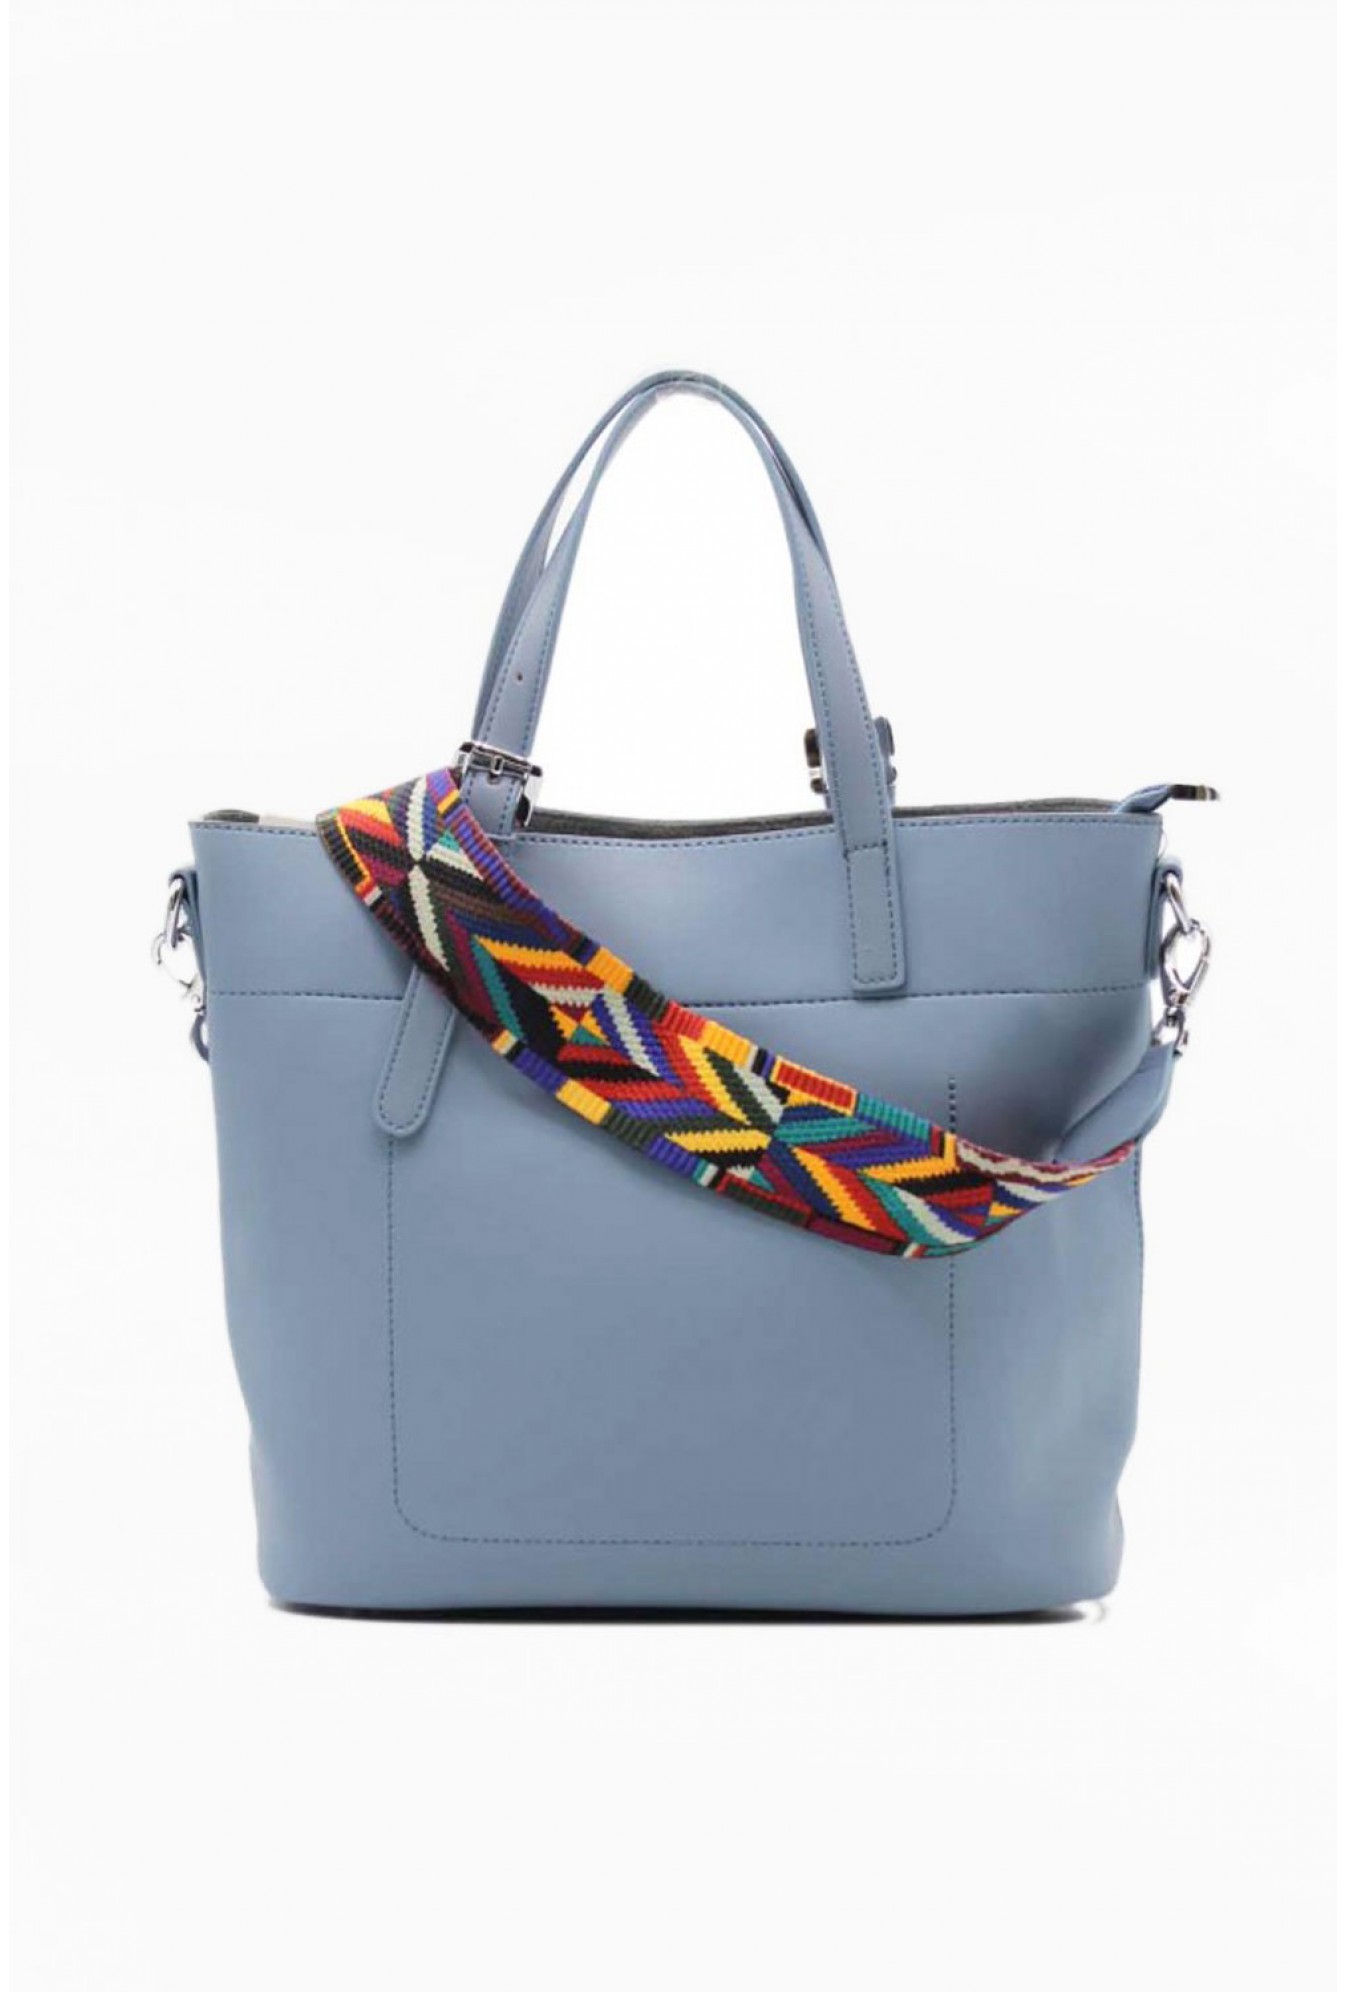 Tom & Eva Oliver Tote Bag with Detachable Strap in Blue | iCLOTHING